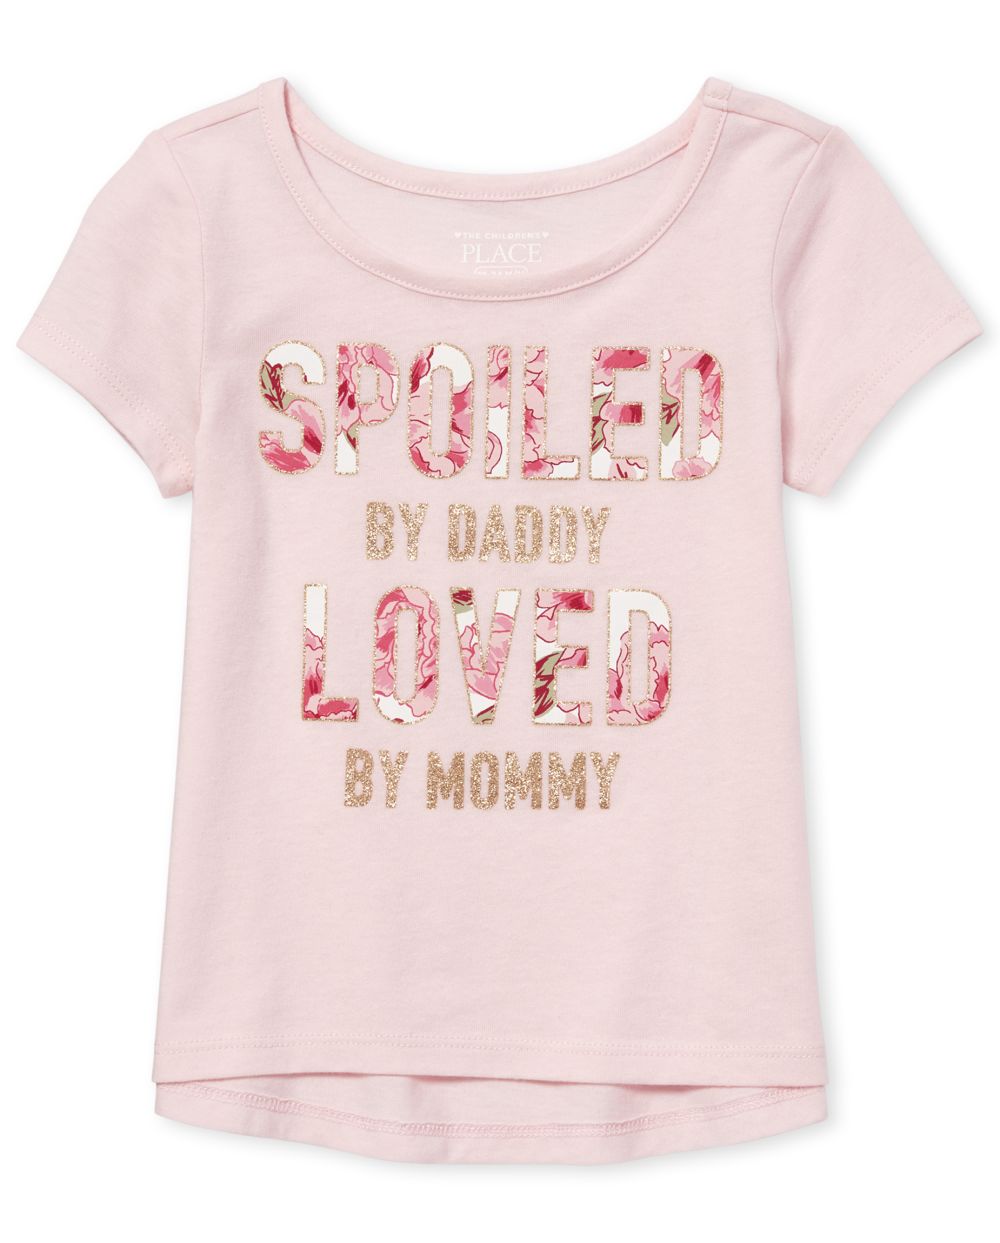 Baby And Toddler Girls Short Sleeve Glitter Graphic Top